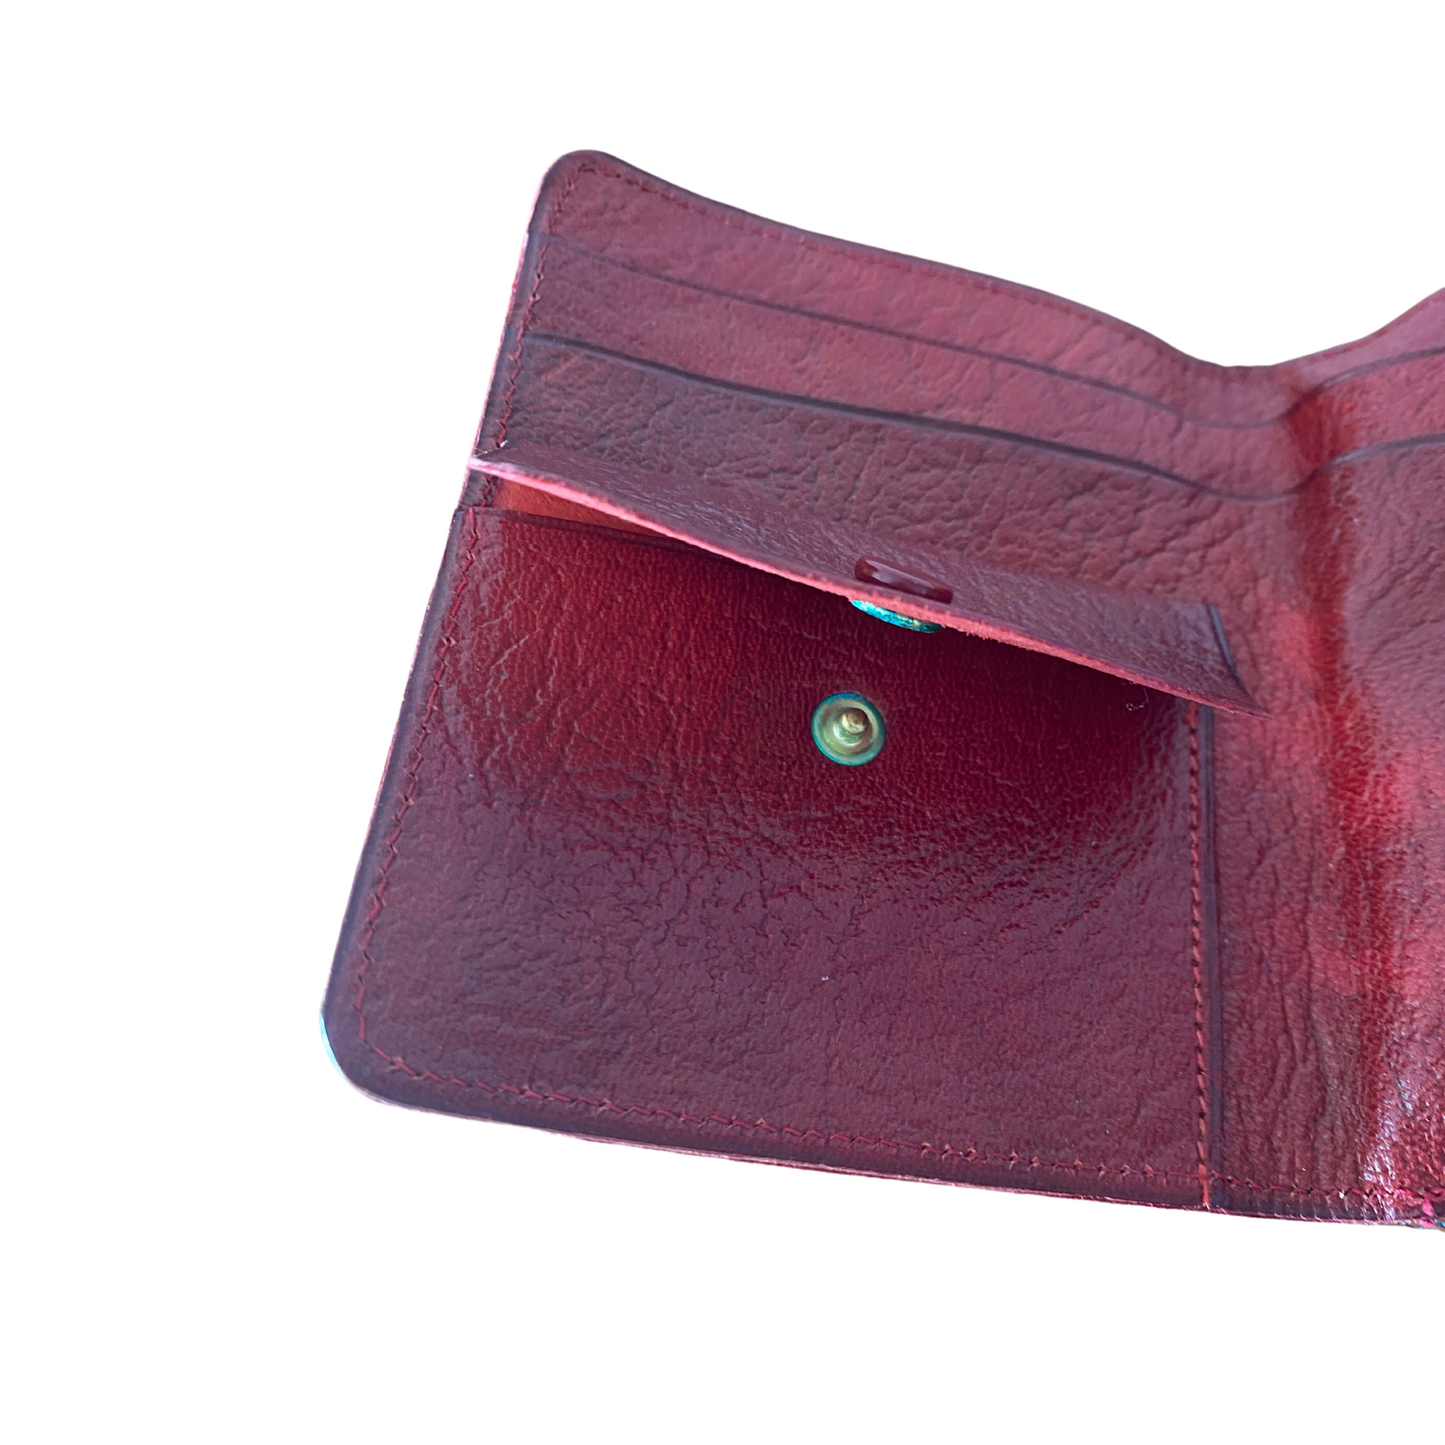 Stylish red leather wallet made in England with a pocket for postal stamps